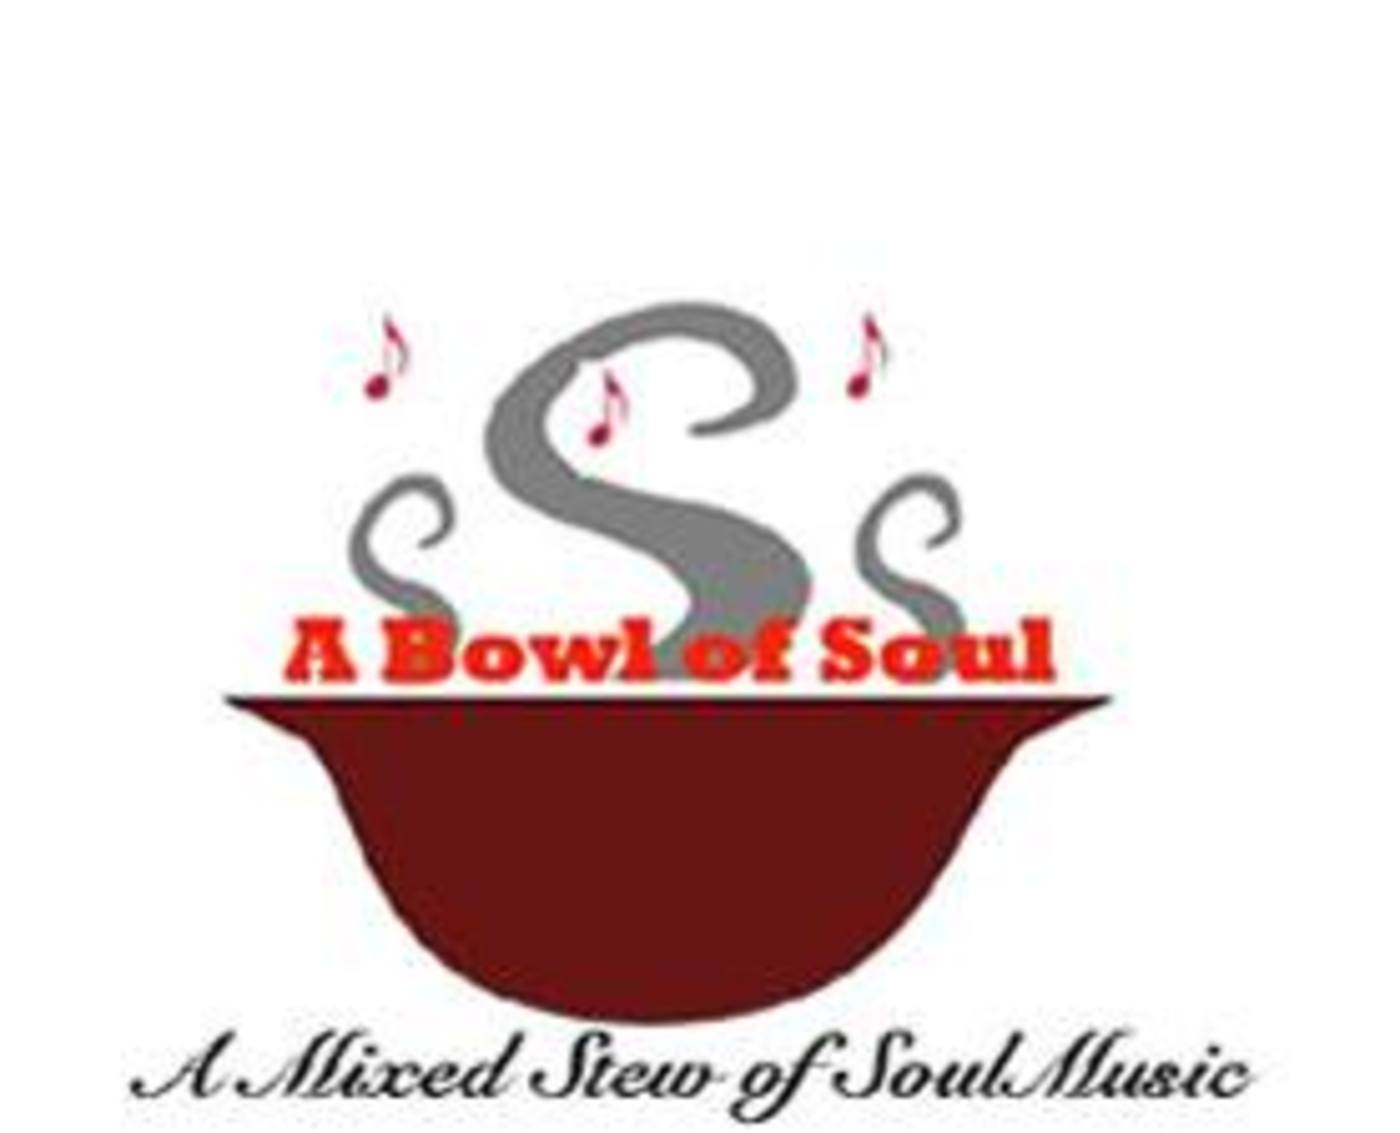 A Bowl of Soul A Mixed Stew of Soul Music - 05-10-2014